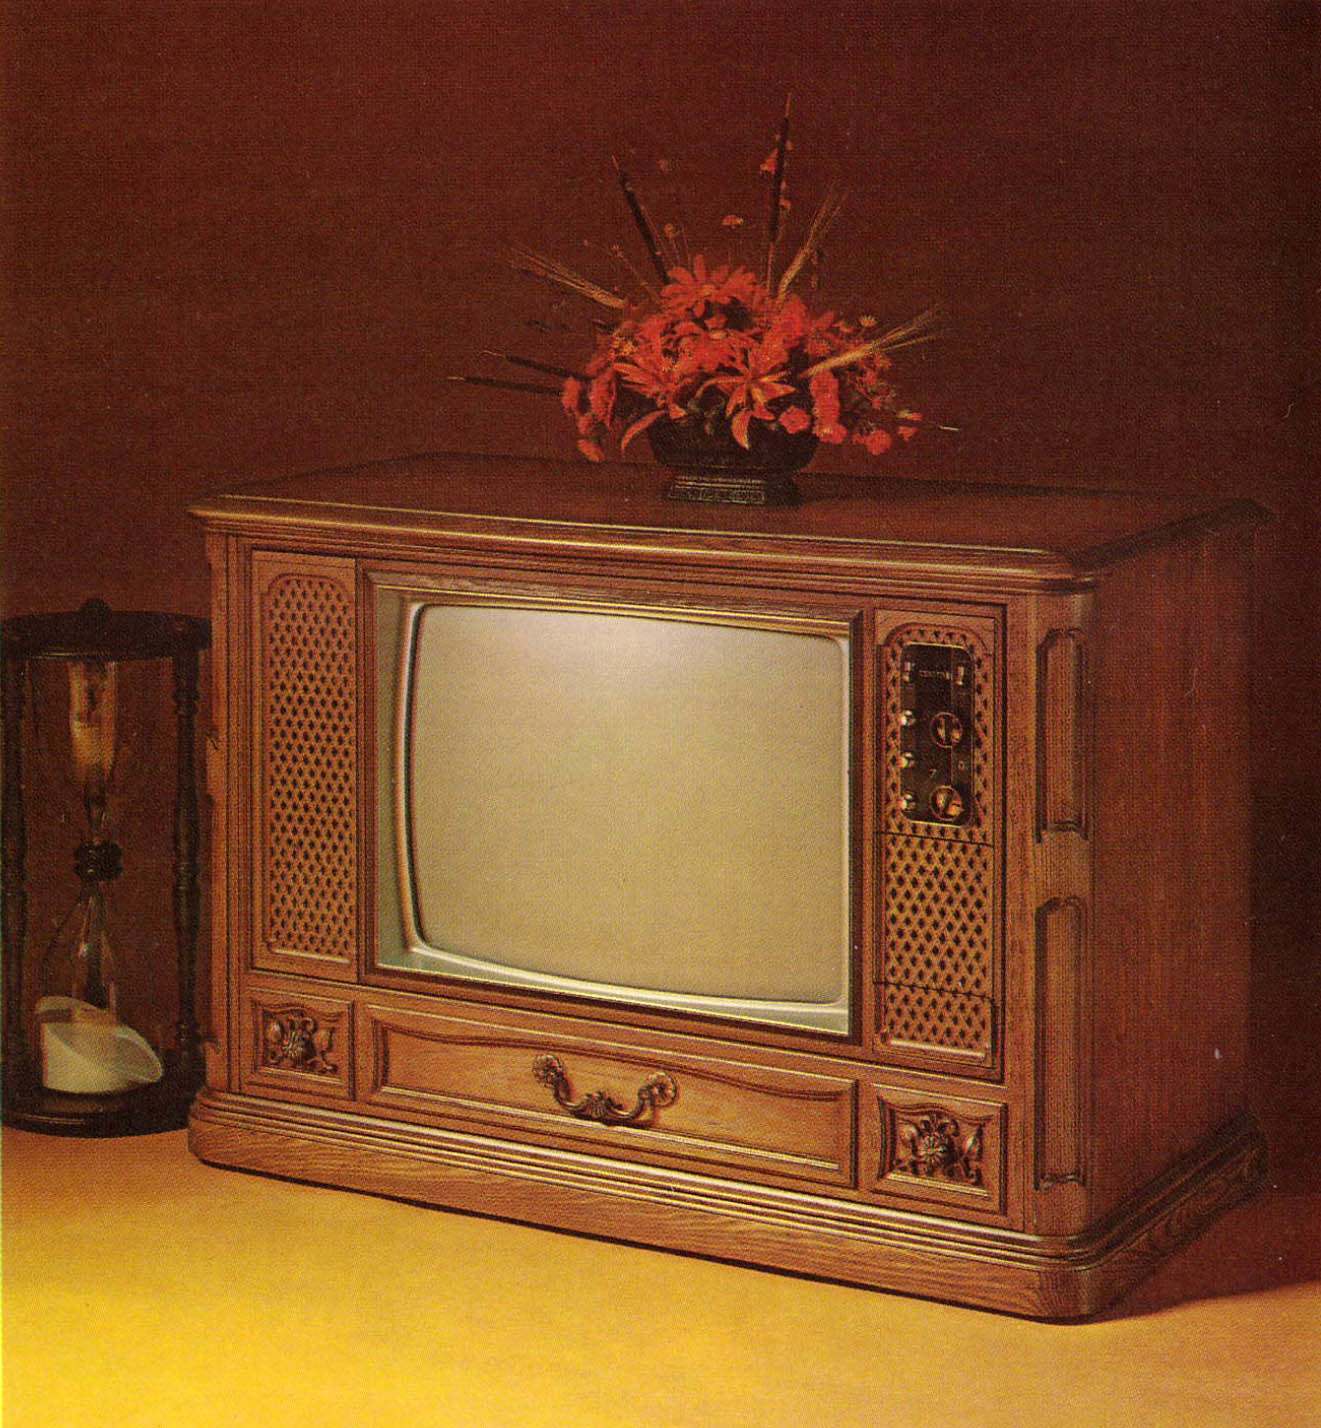 The Amazing 1971 Zenith Color Tv Coloring Wallpapers Download Free Images Wallpaper [coloring654.blogspot.com]